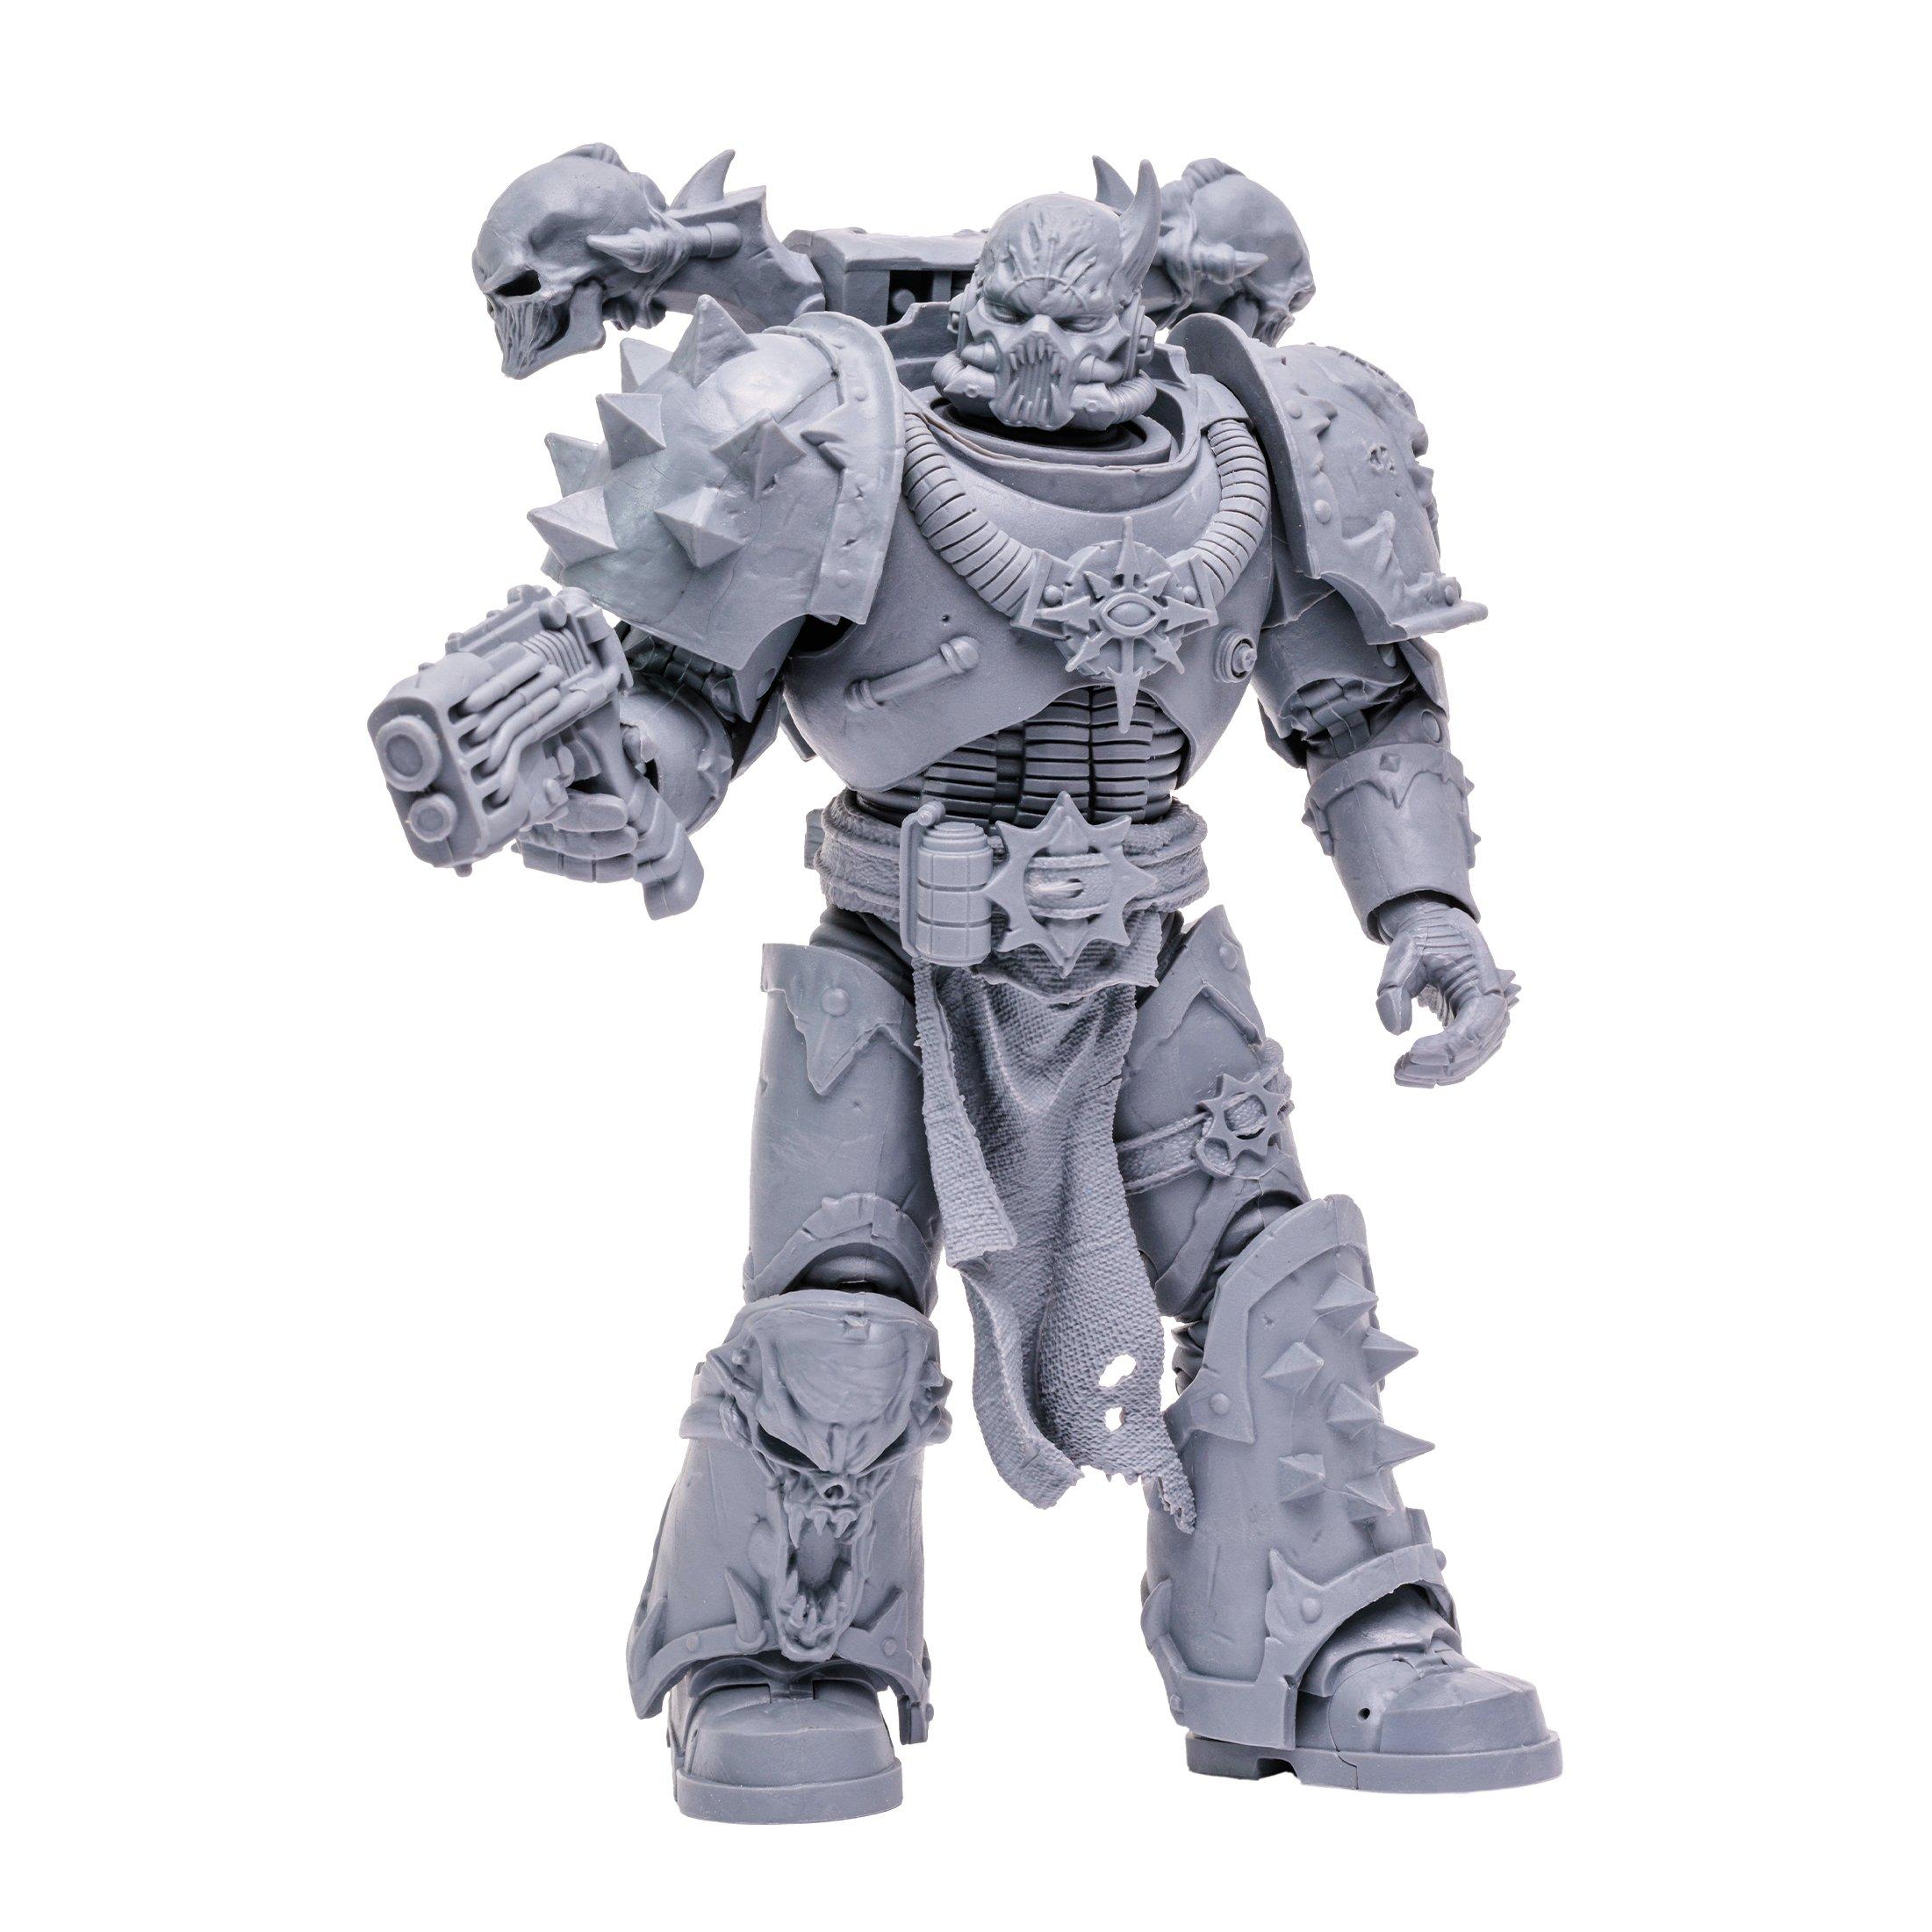 McFarlane Toys Warhammer 40,000 Chaos Space Marine Artist Proof 7-in Scale Action Figure